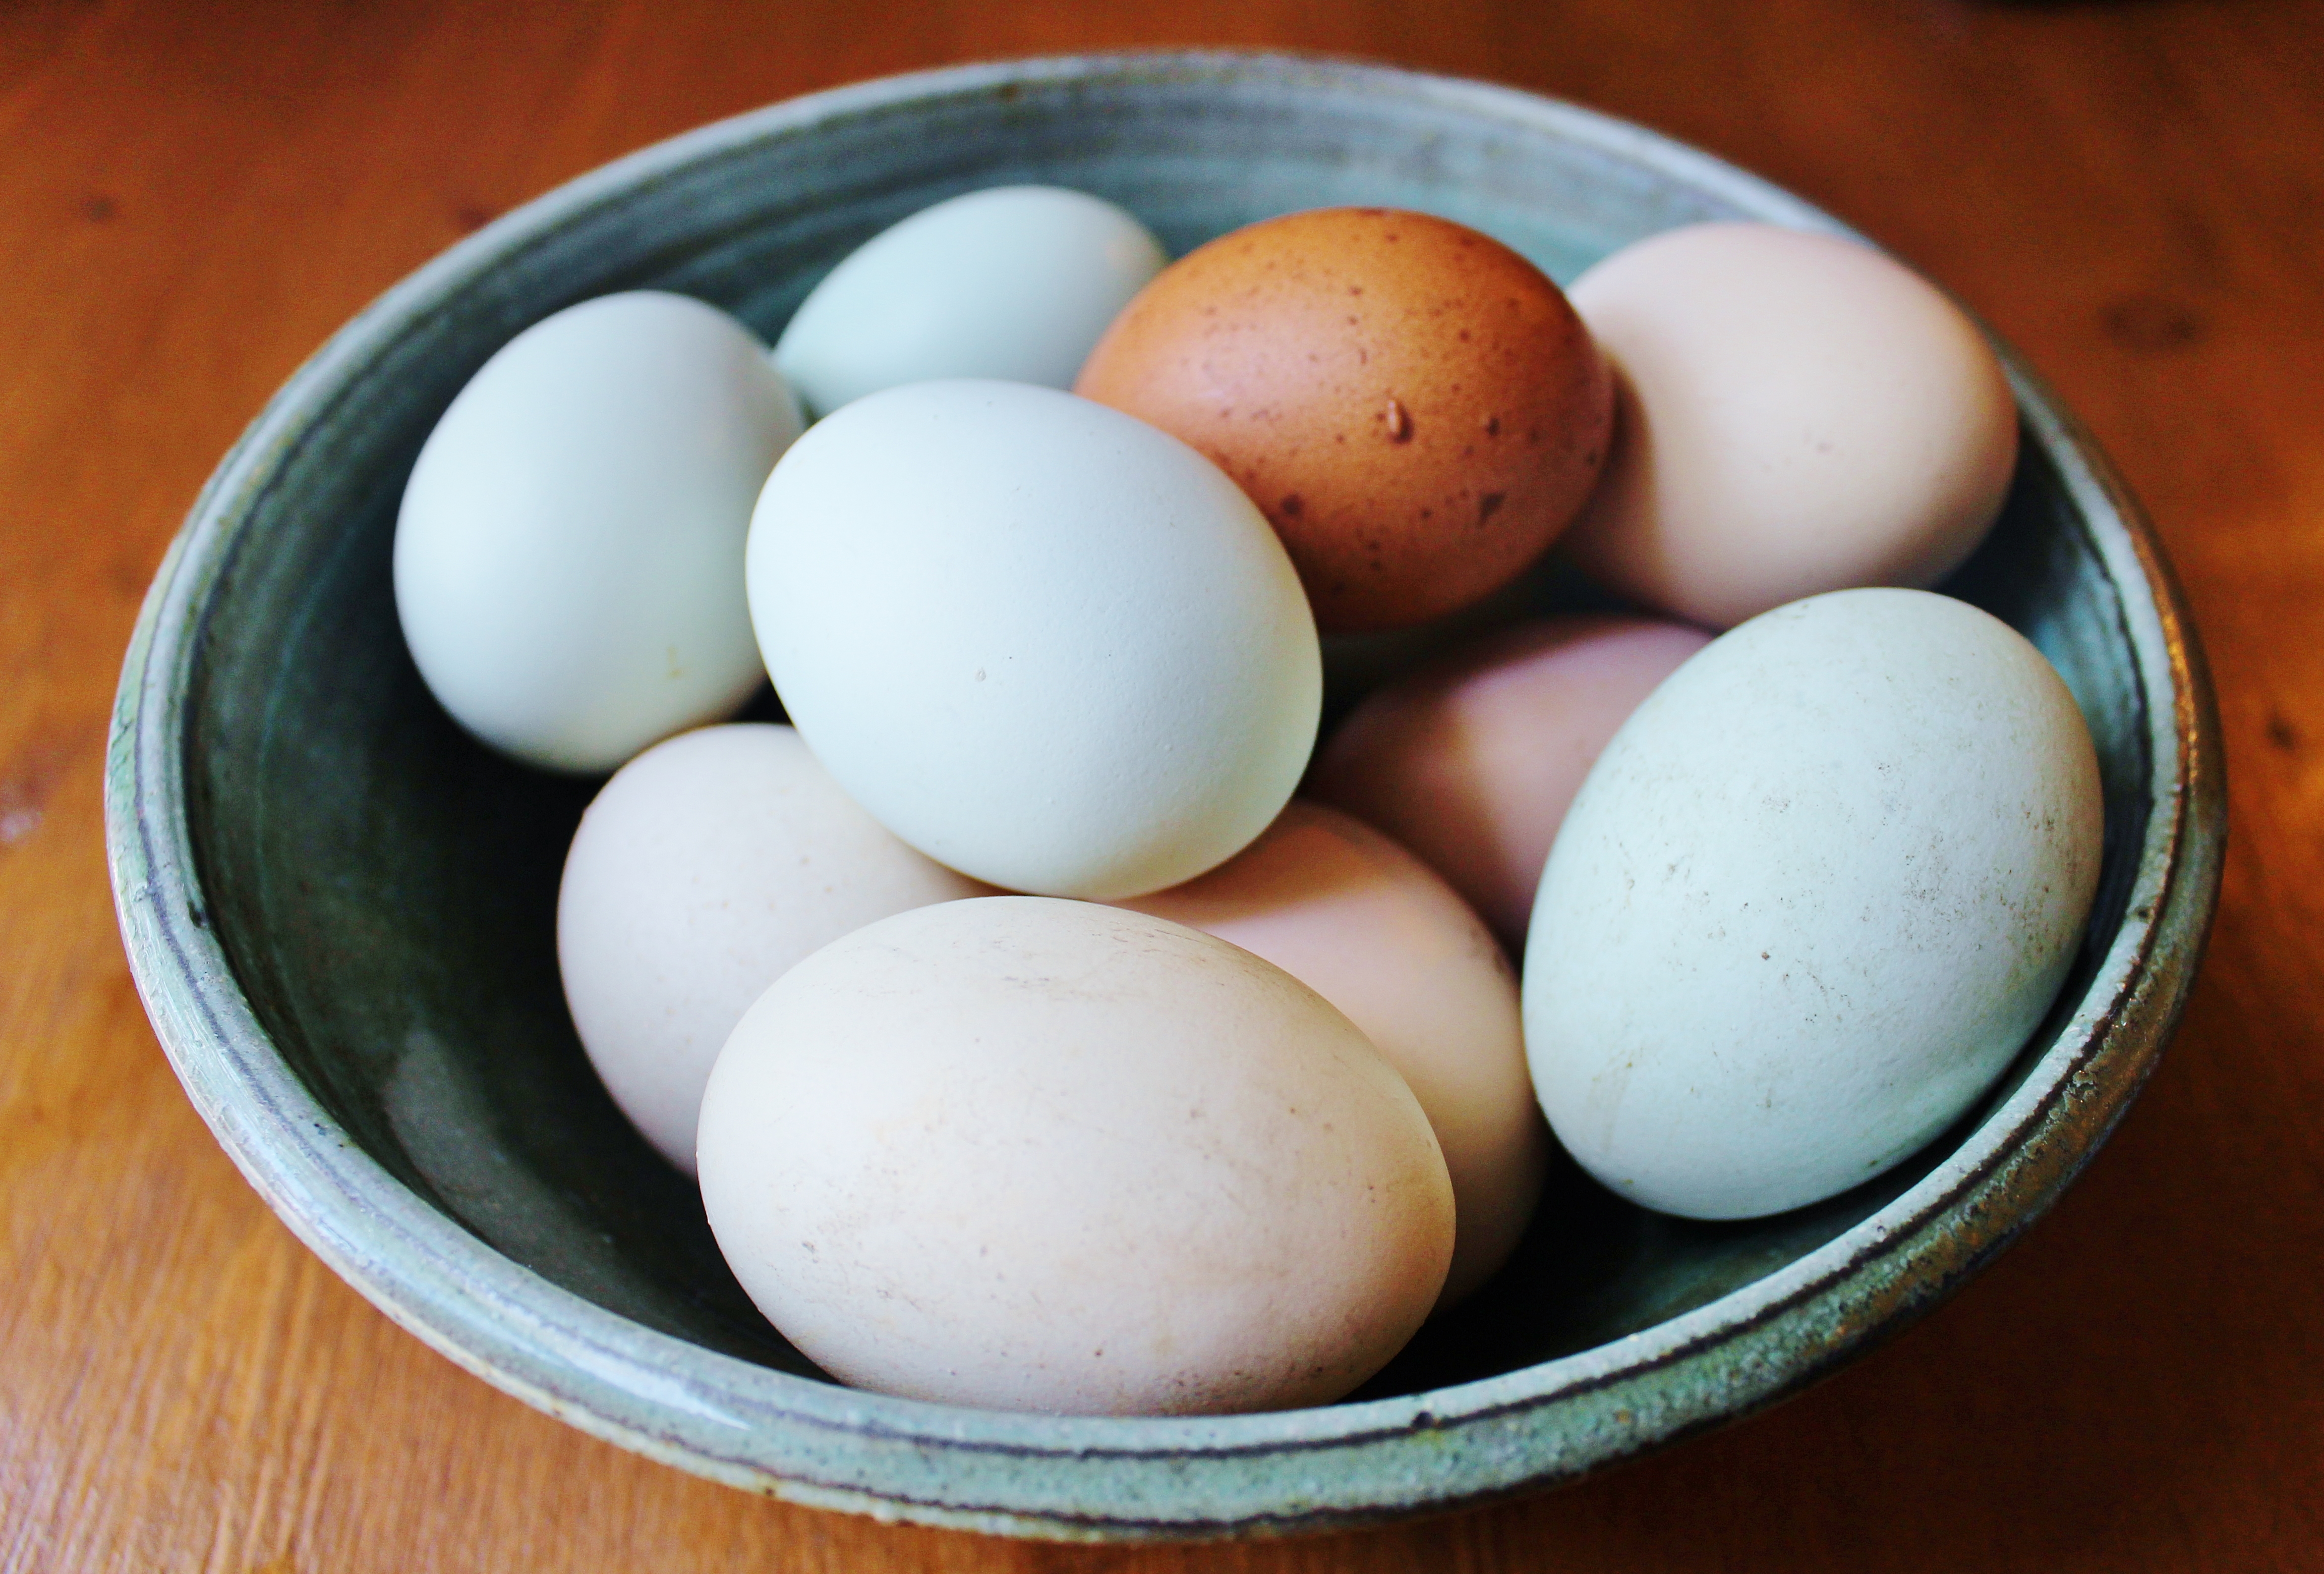 brown, blue, and regular eggs